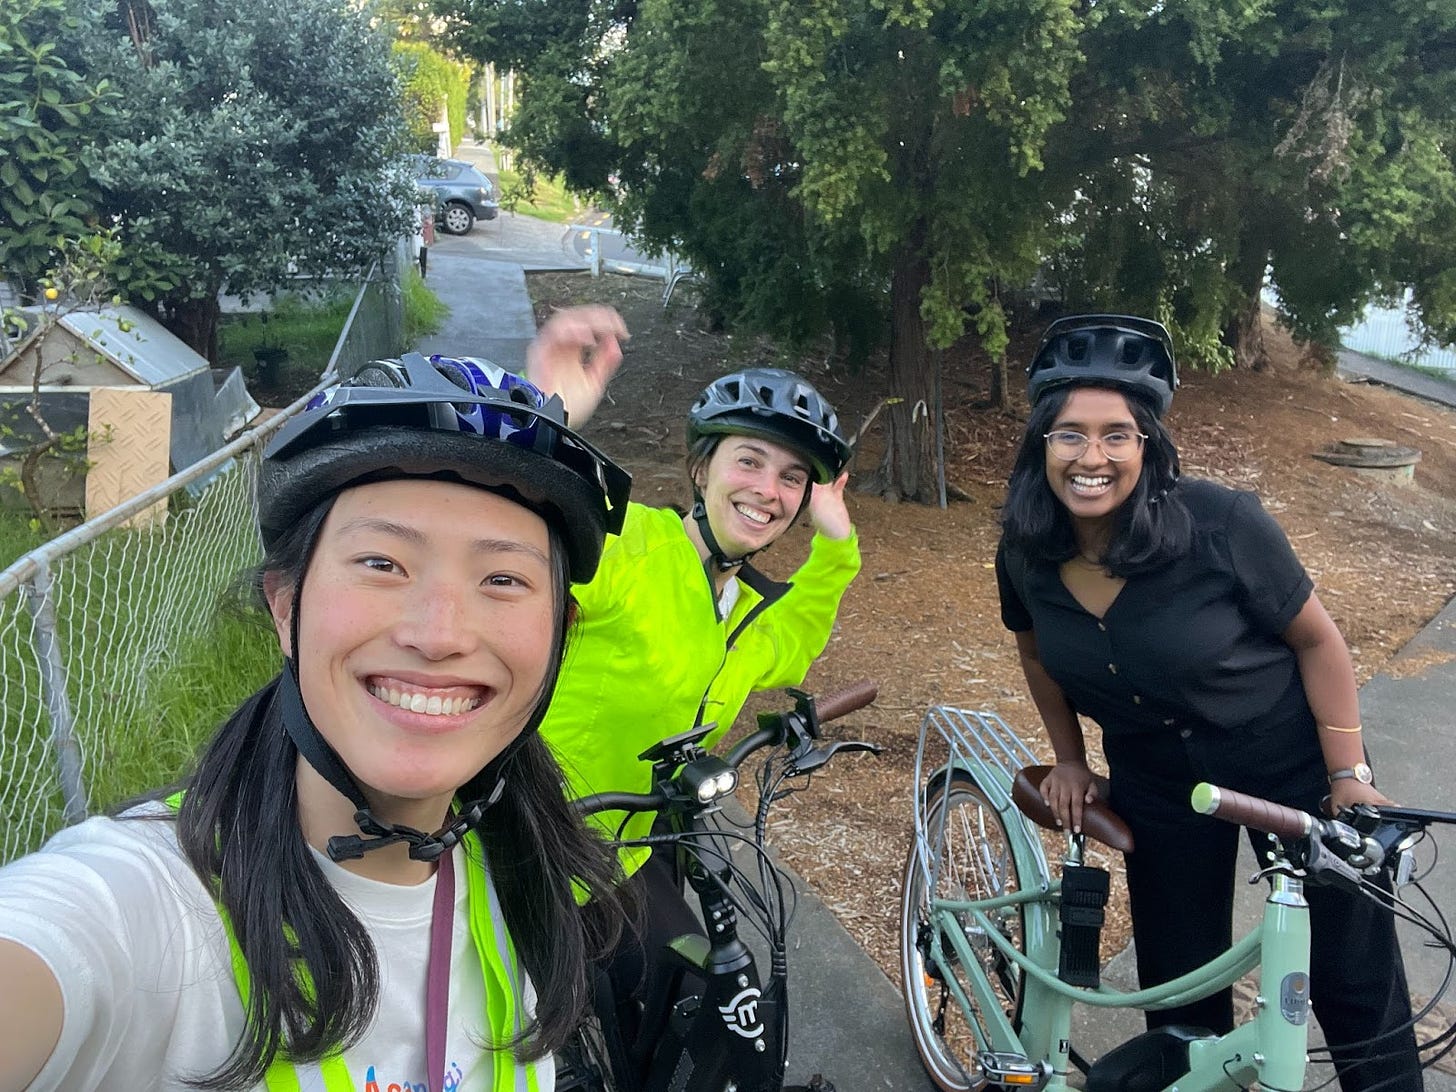 3 women smiling at the camera in bike helmets, with their bikes in front of them. Jenny has long black hair is holding the camera taking the selfie, Emily is in a high-vis jacket and raising her hands in excitement, and Dhanya is laughing while leaning on her sage green e-bike.